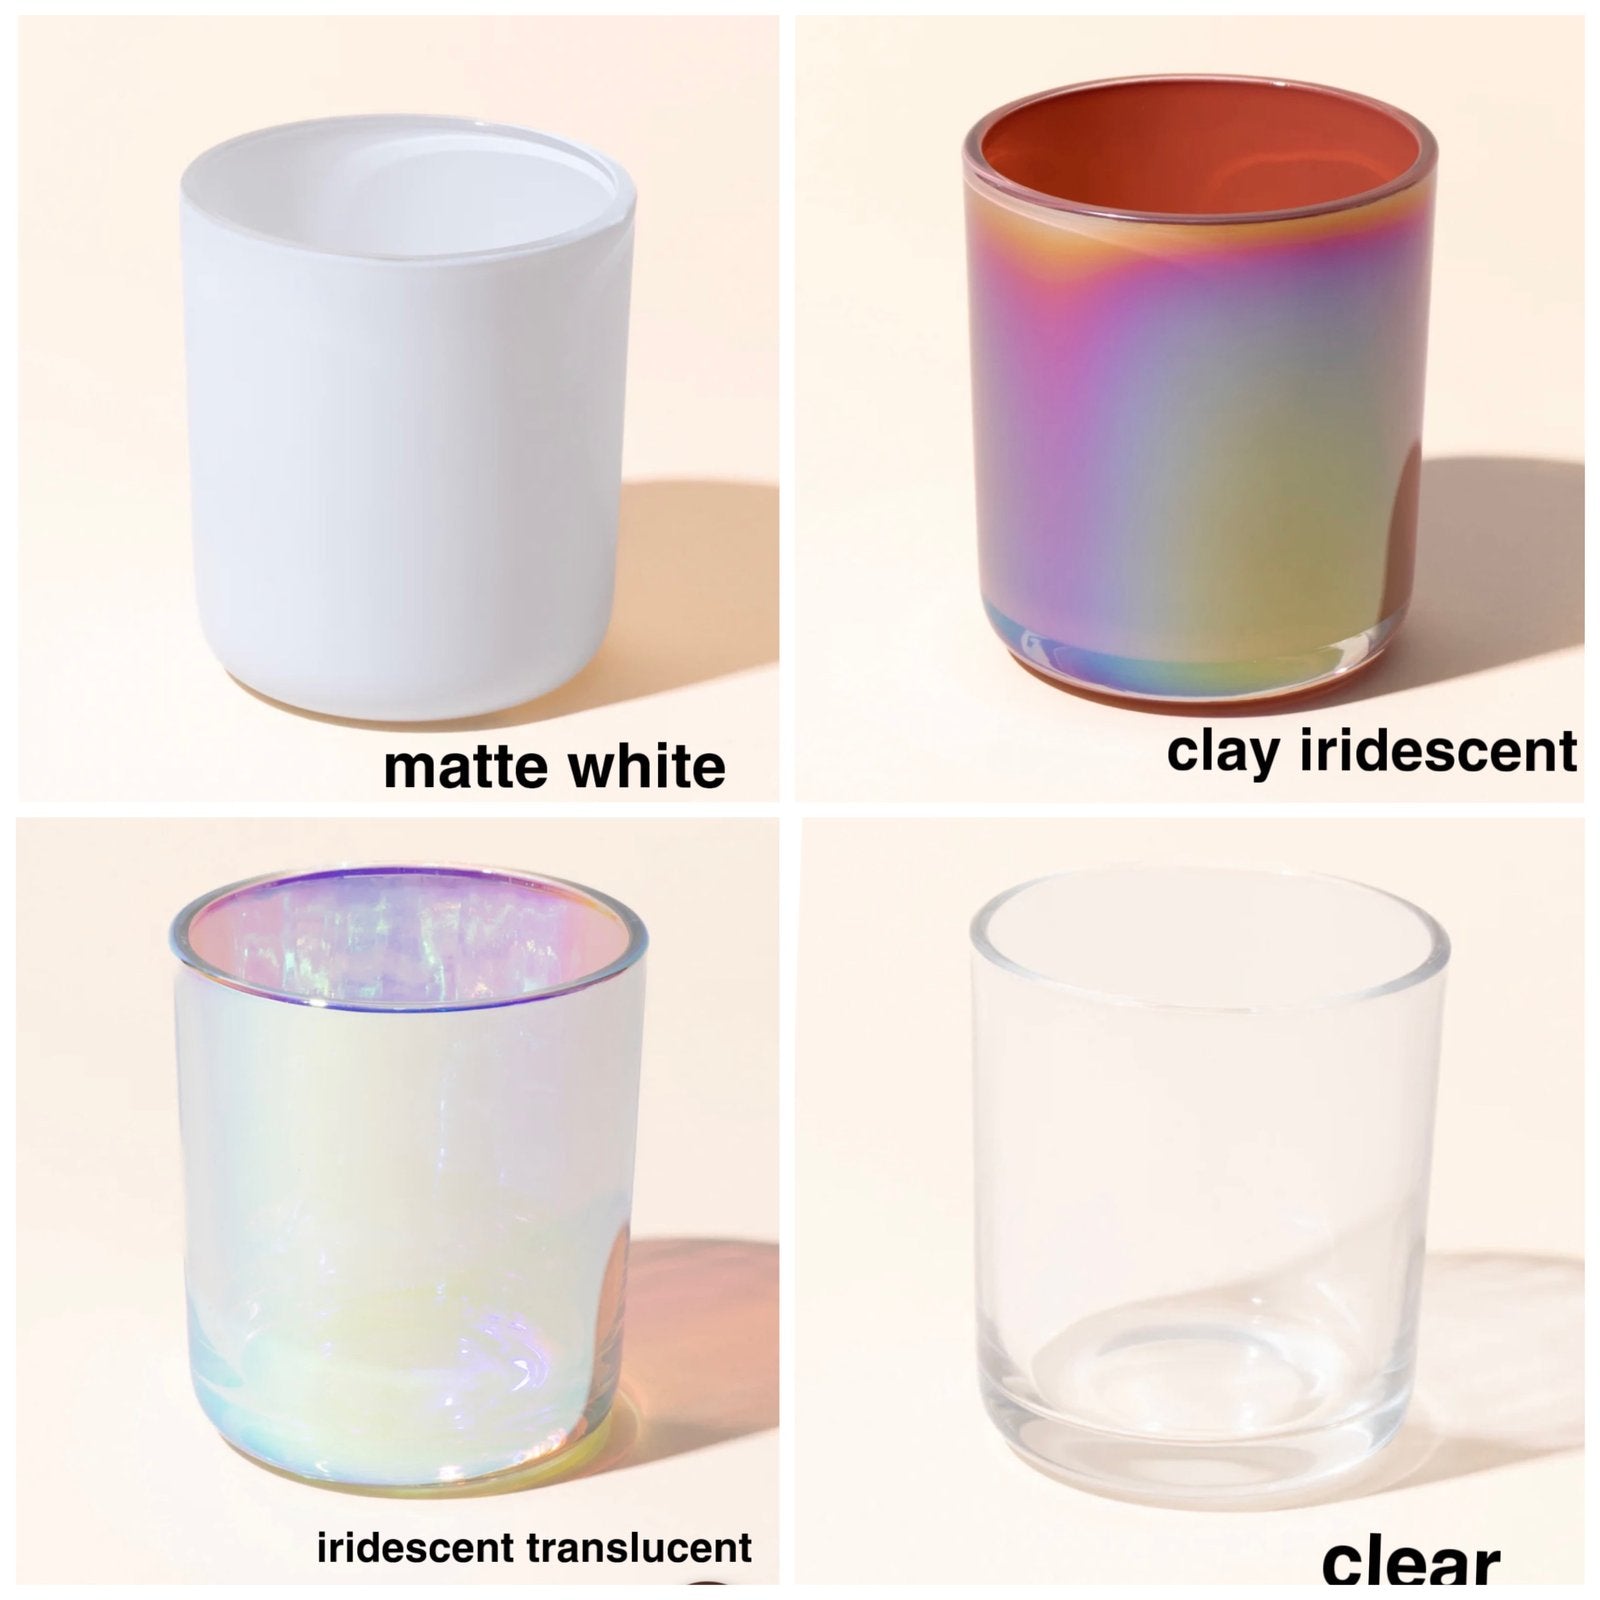 Customizable scented soy wax vessel 